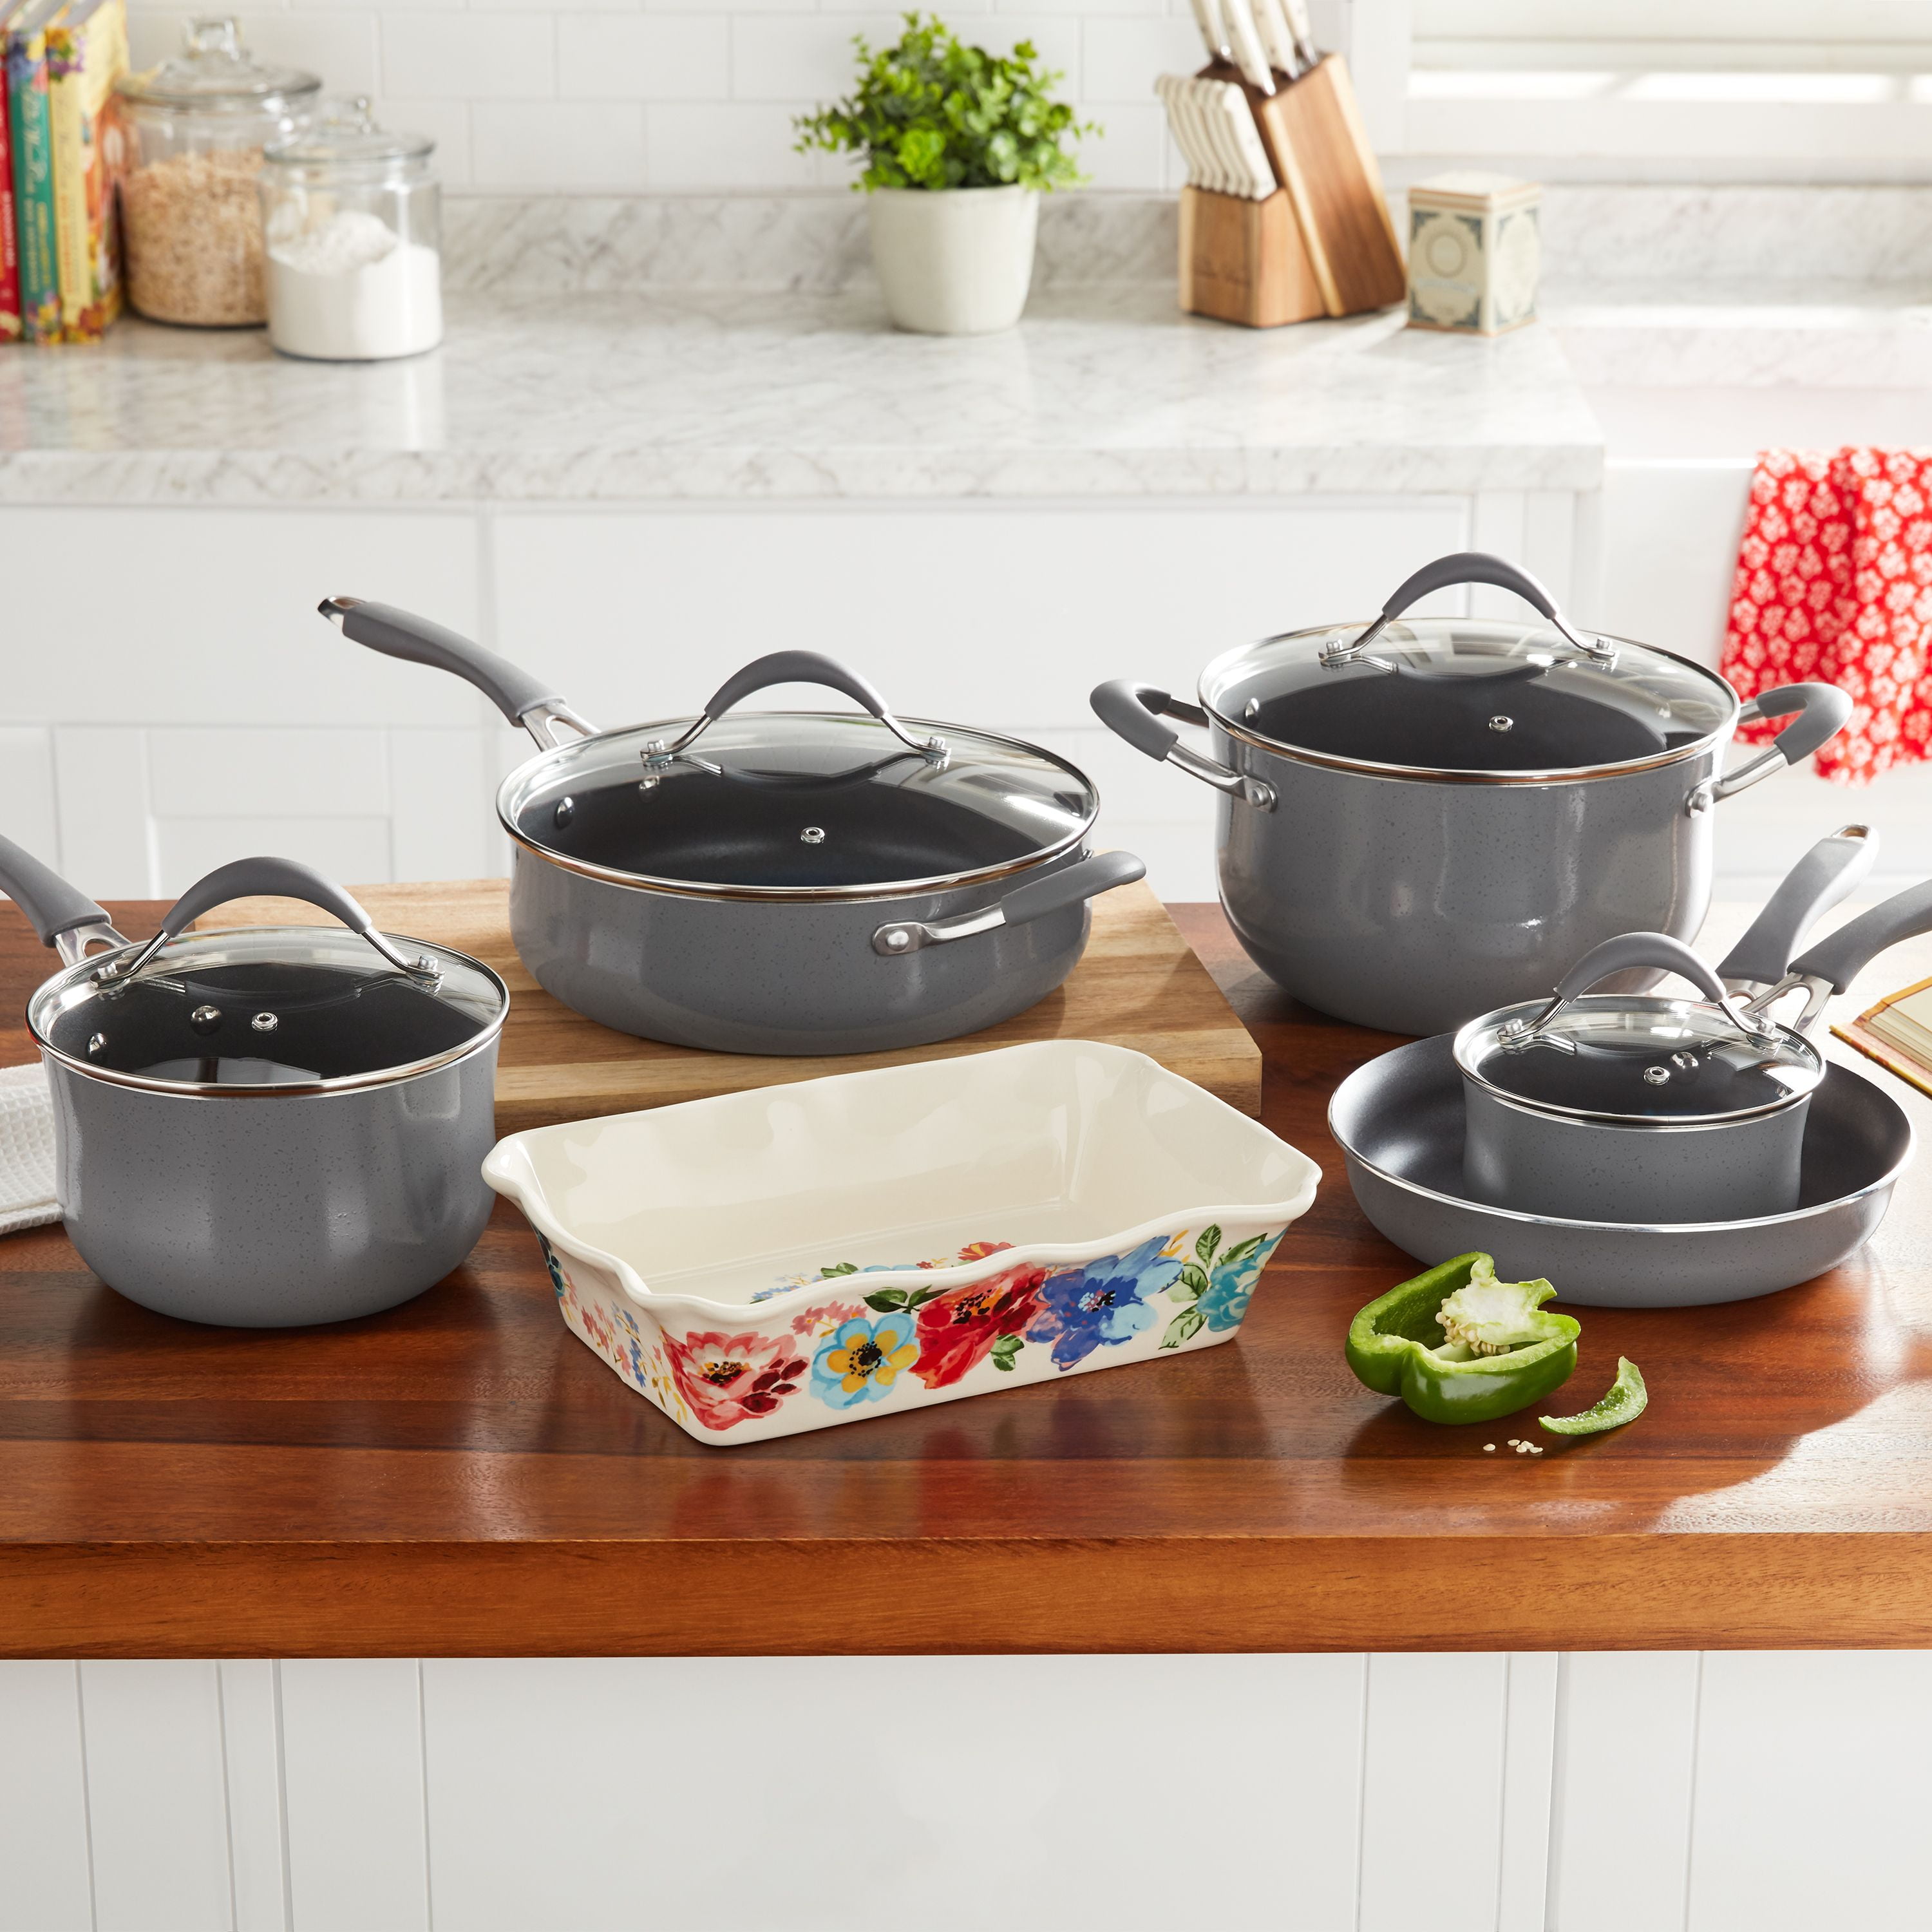 Walmart Booneville - N College St - Pioneer Woman cookware sets